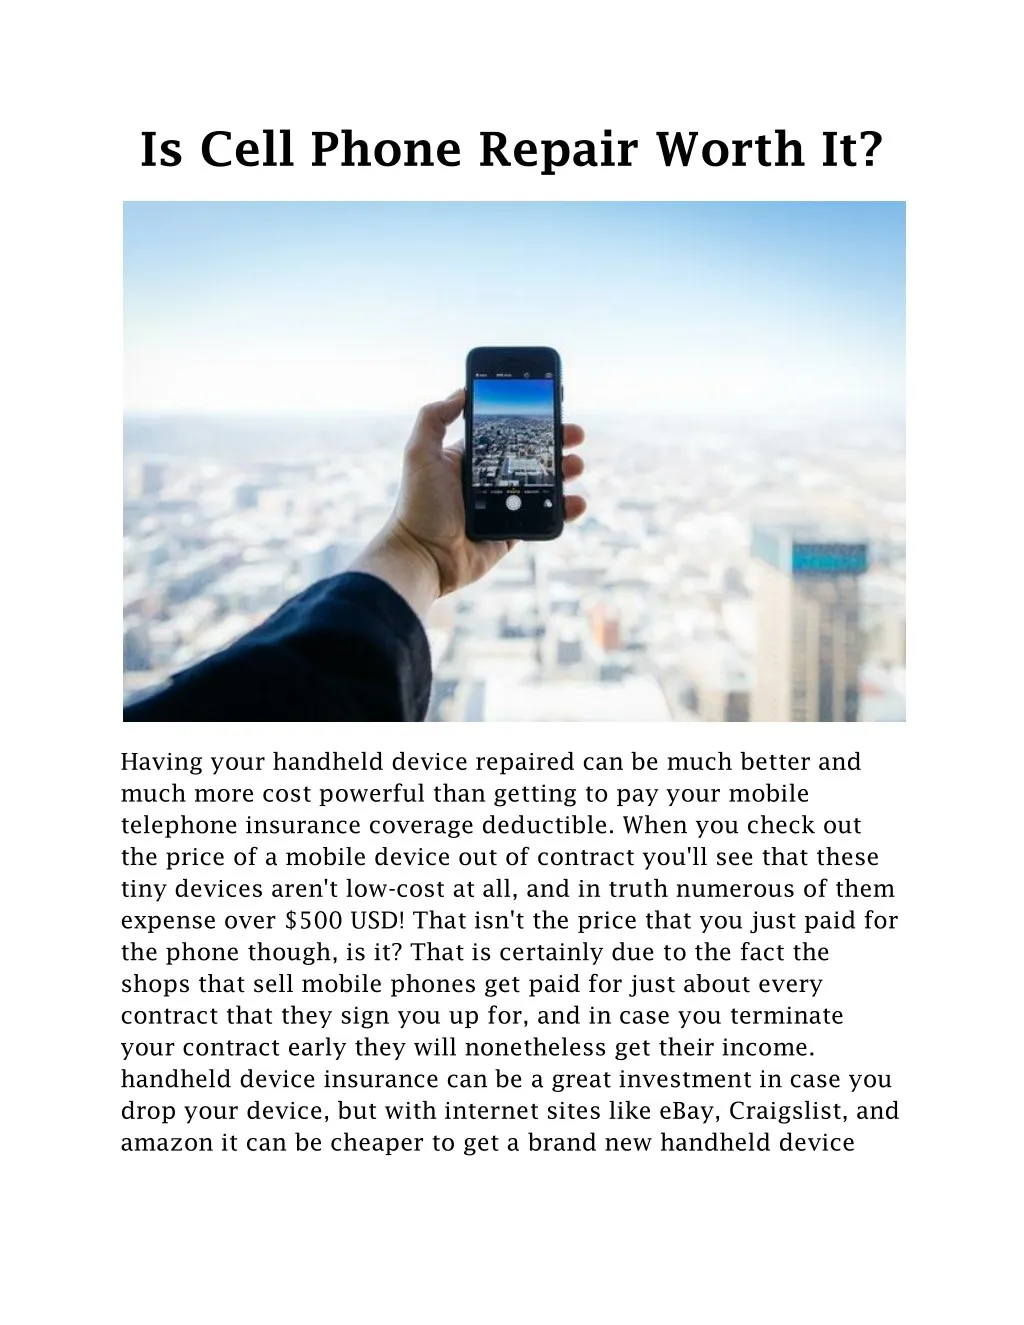 is cell phone repair worth it